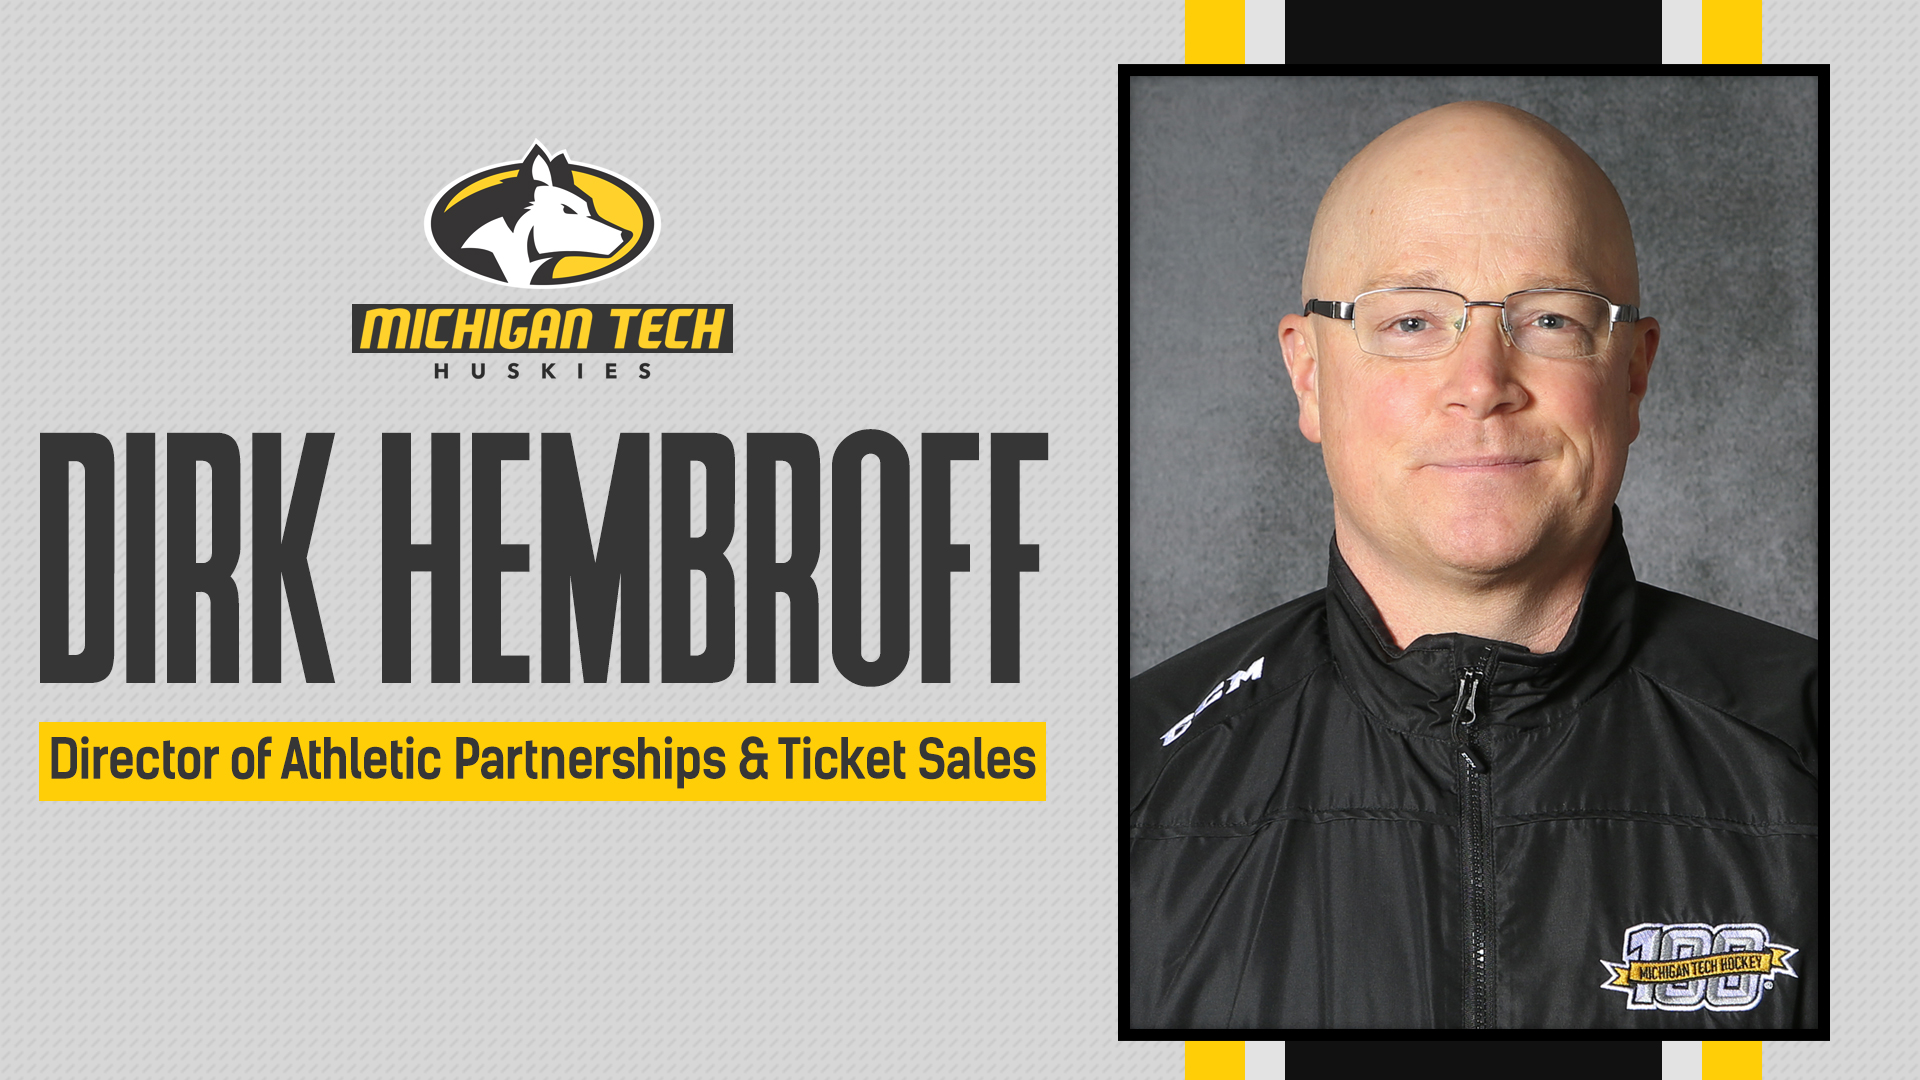 Hembroff named Director of Athletic Partnerships & Ticket Sales